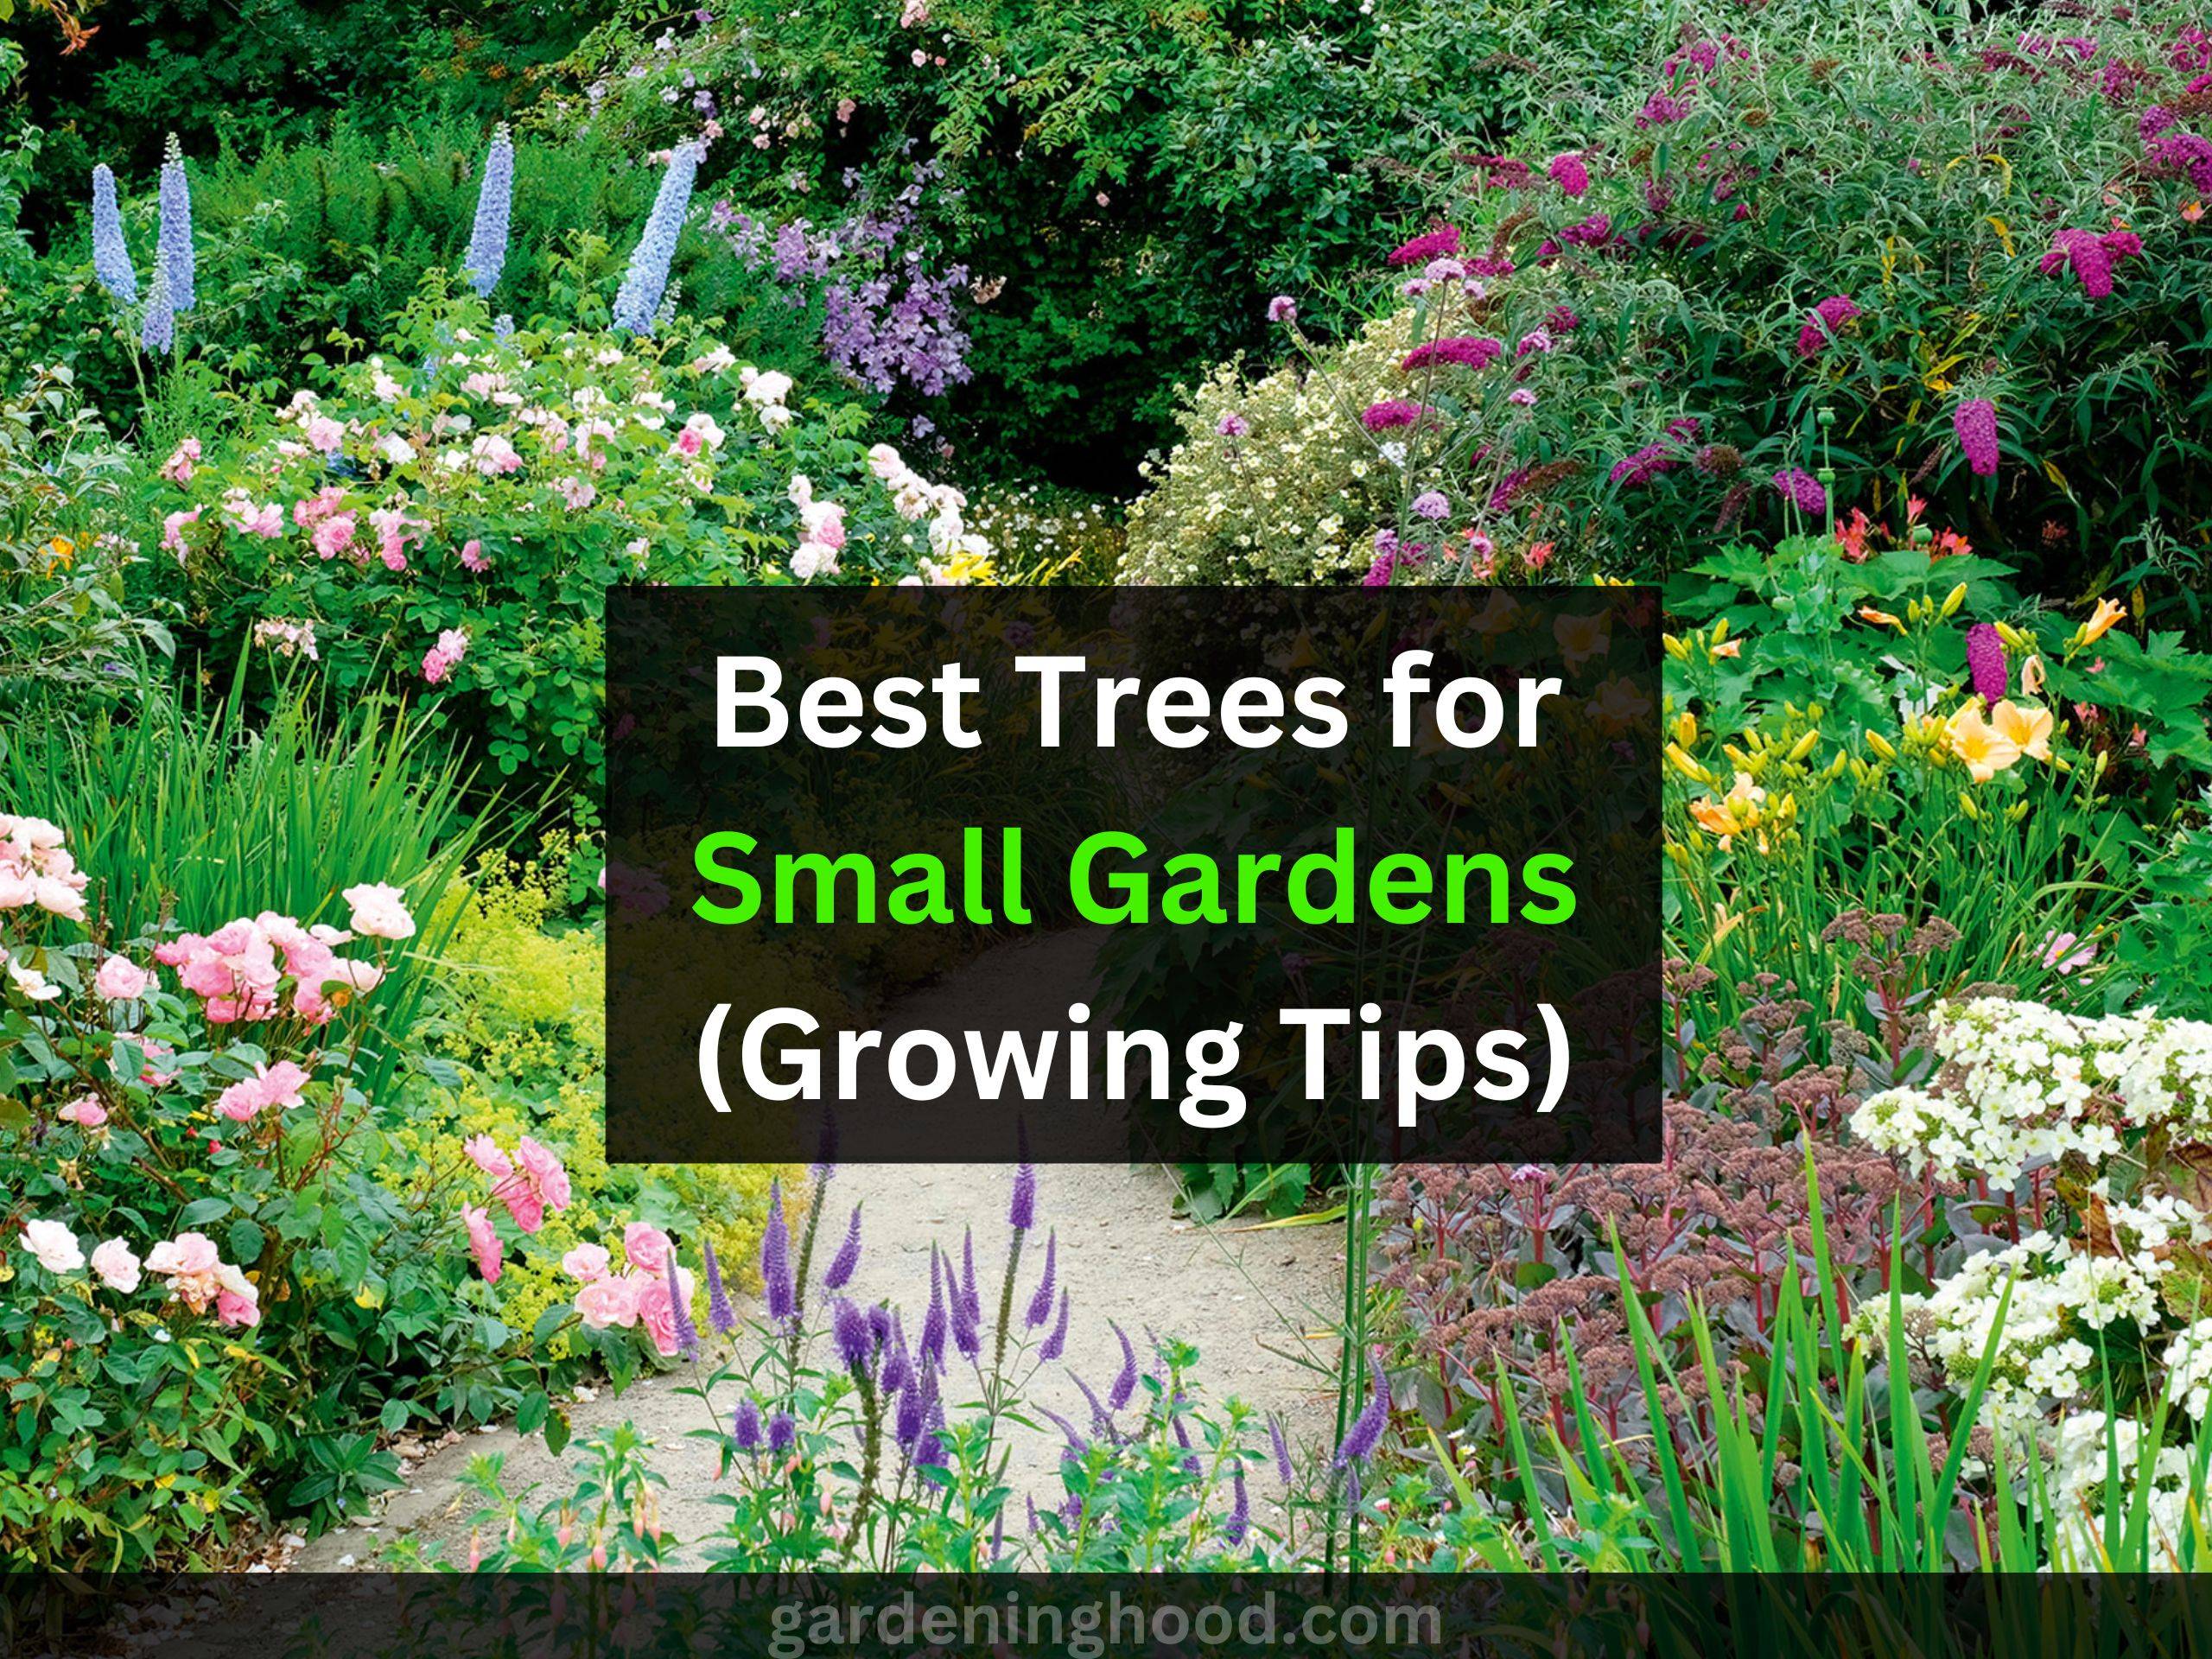 Best Trees for Small Gardens (Growing Tips)